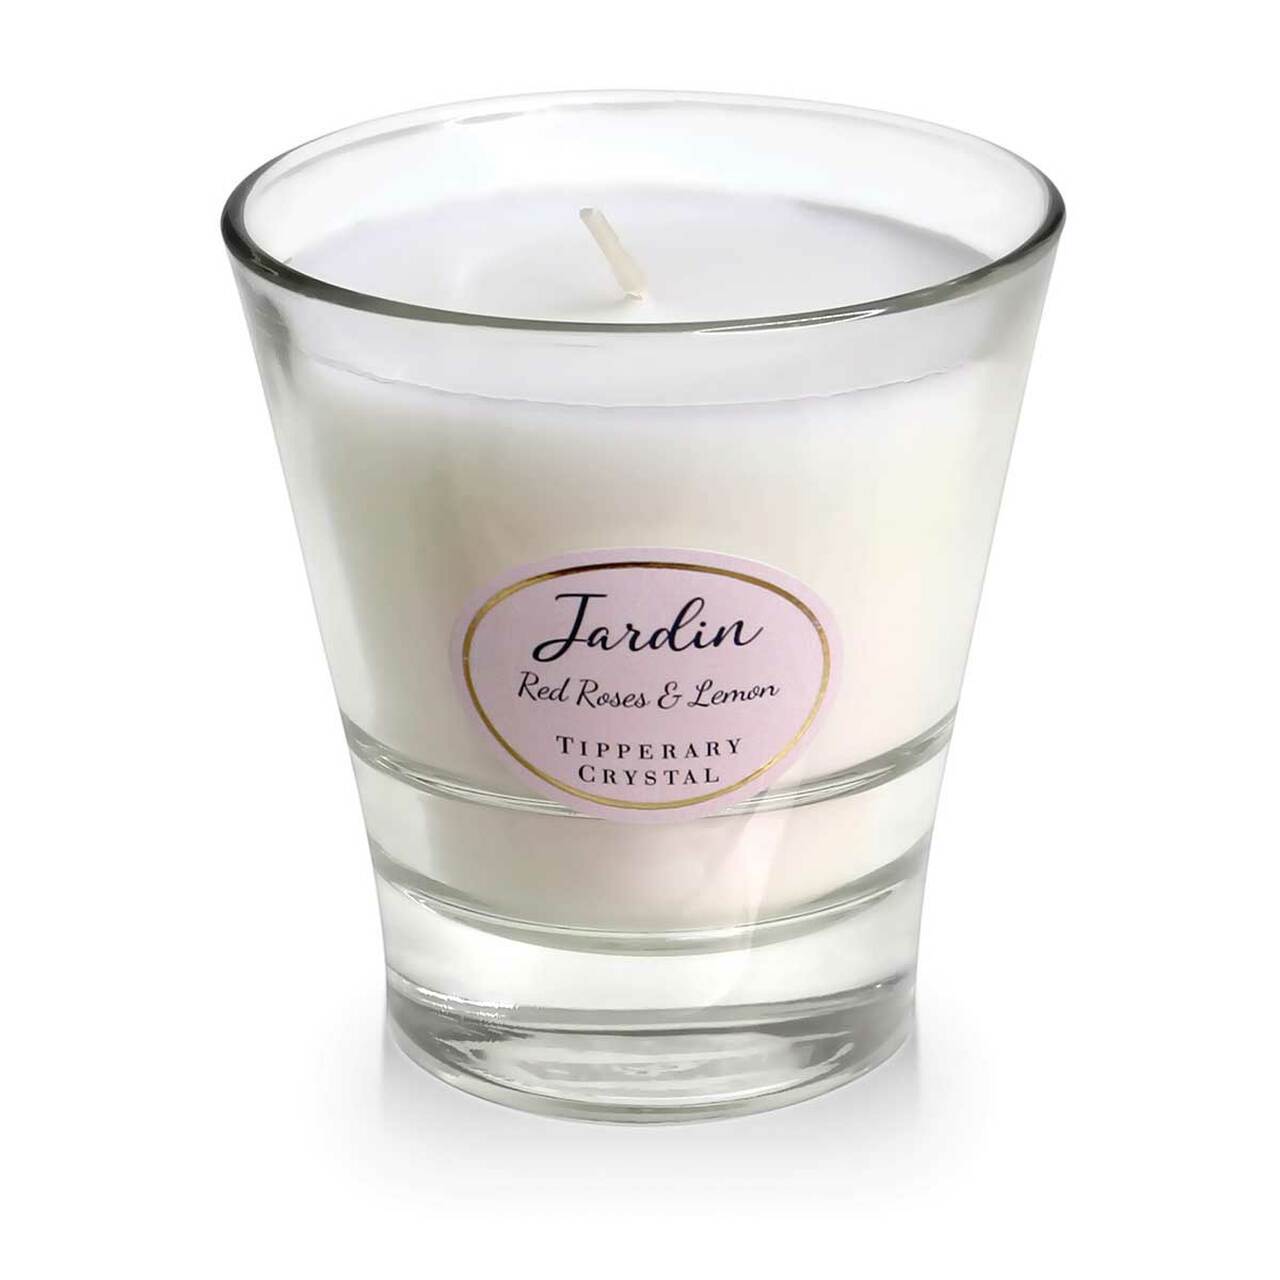 Tipperary Crystal Red Roses & Lemon Jardin Collection Candle